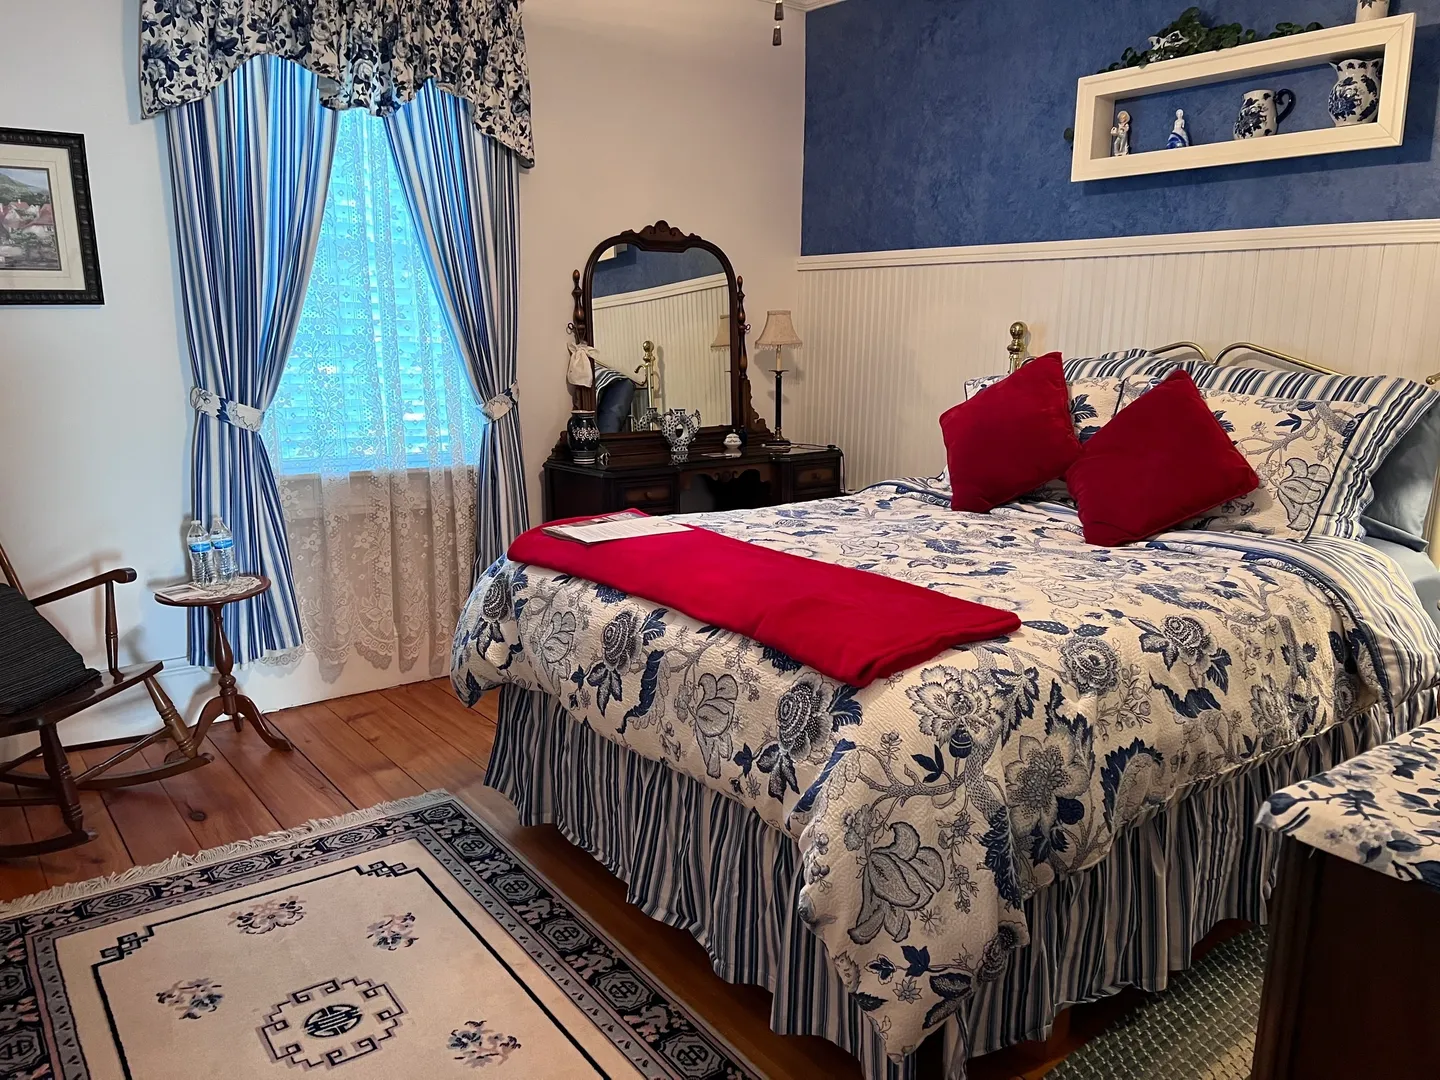 A bedroom with blue walls and red pillows.